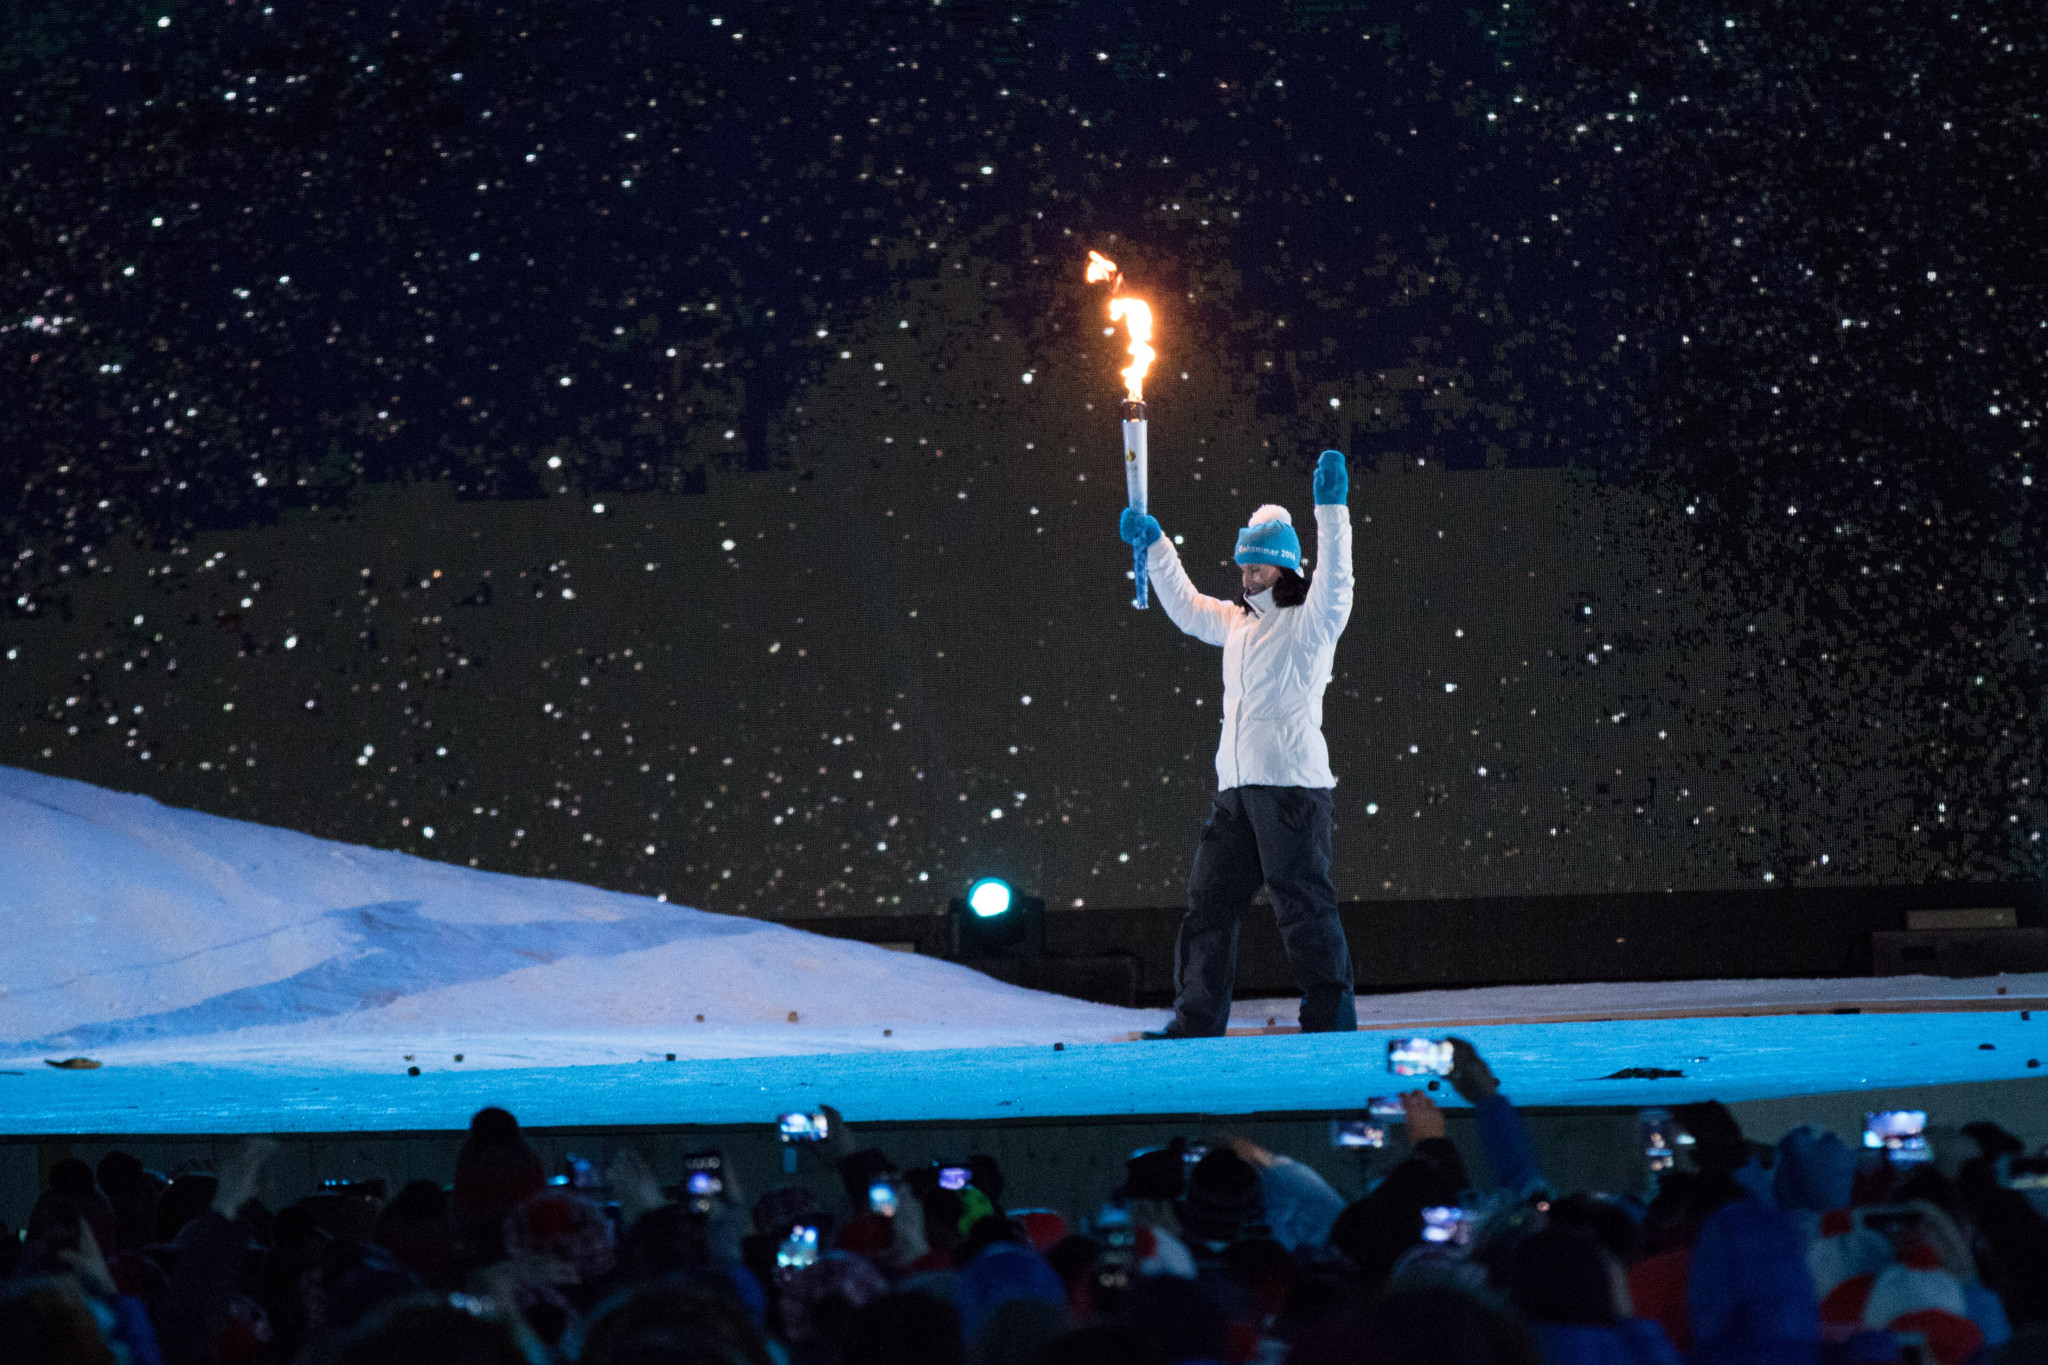 Lillehammer 2016 saw a mixture of hope and wonder at its Opening Ceremony ©Getty Images